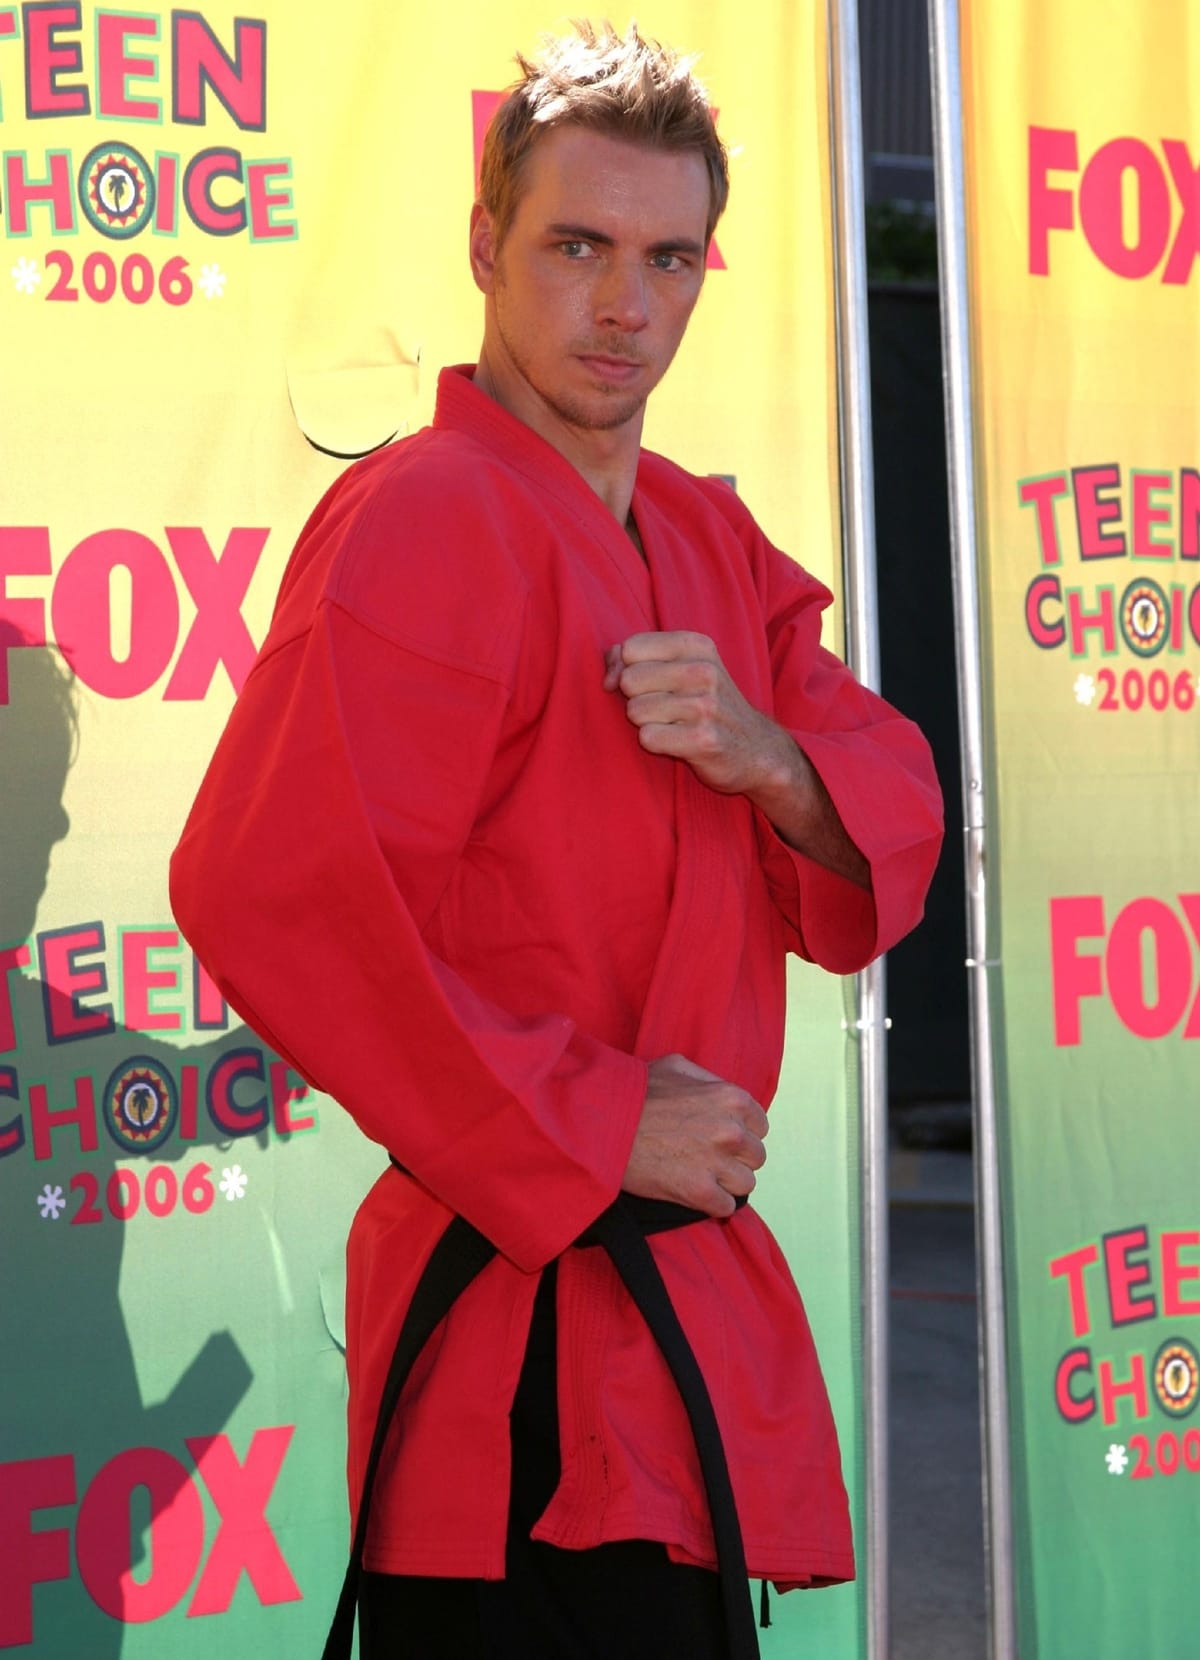 Dax Shepard during the 2006 Teen Choice Awards ceremony